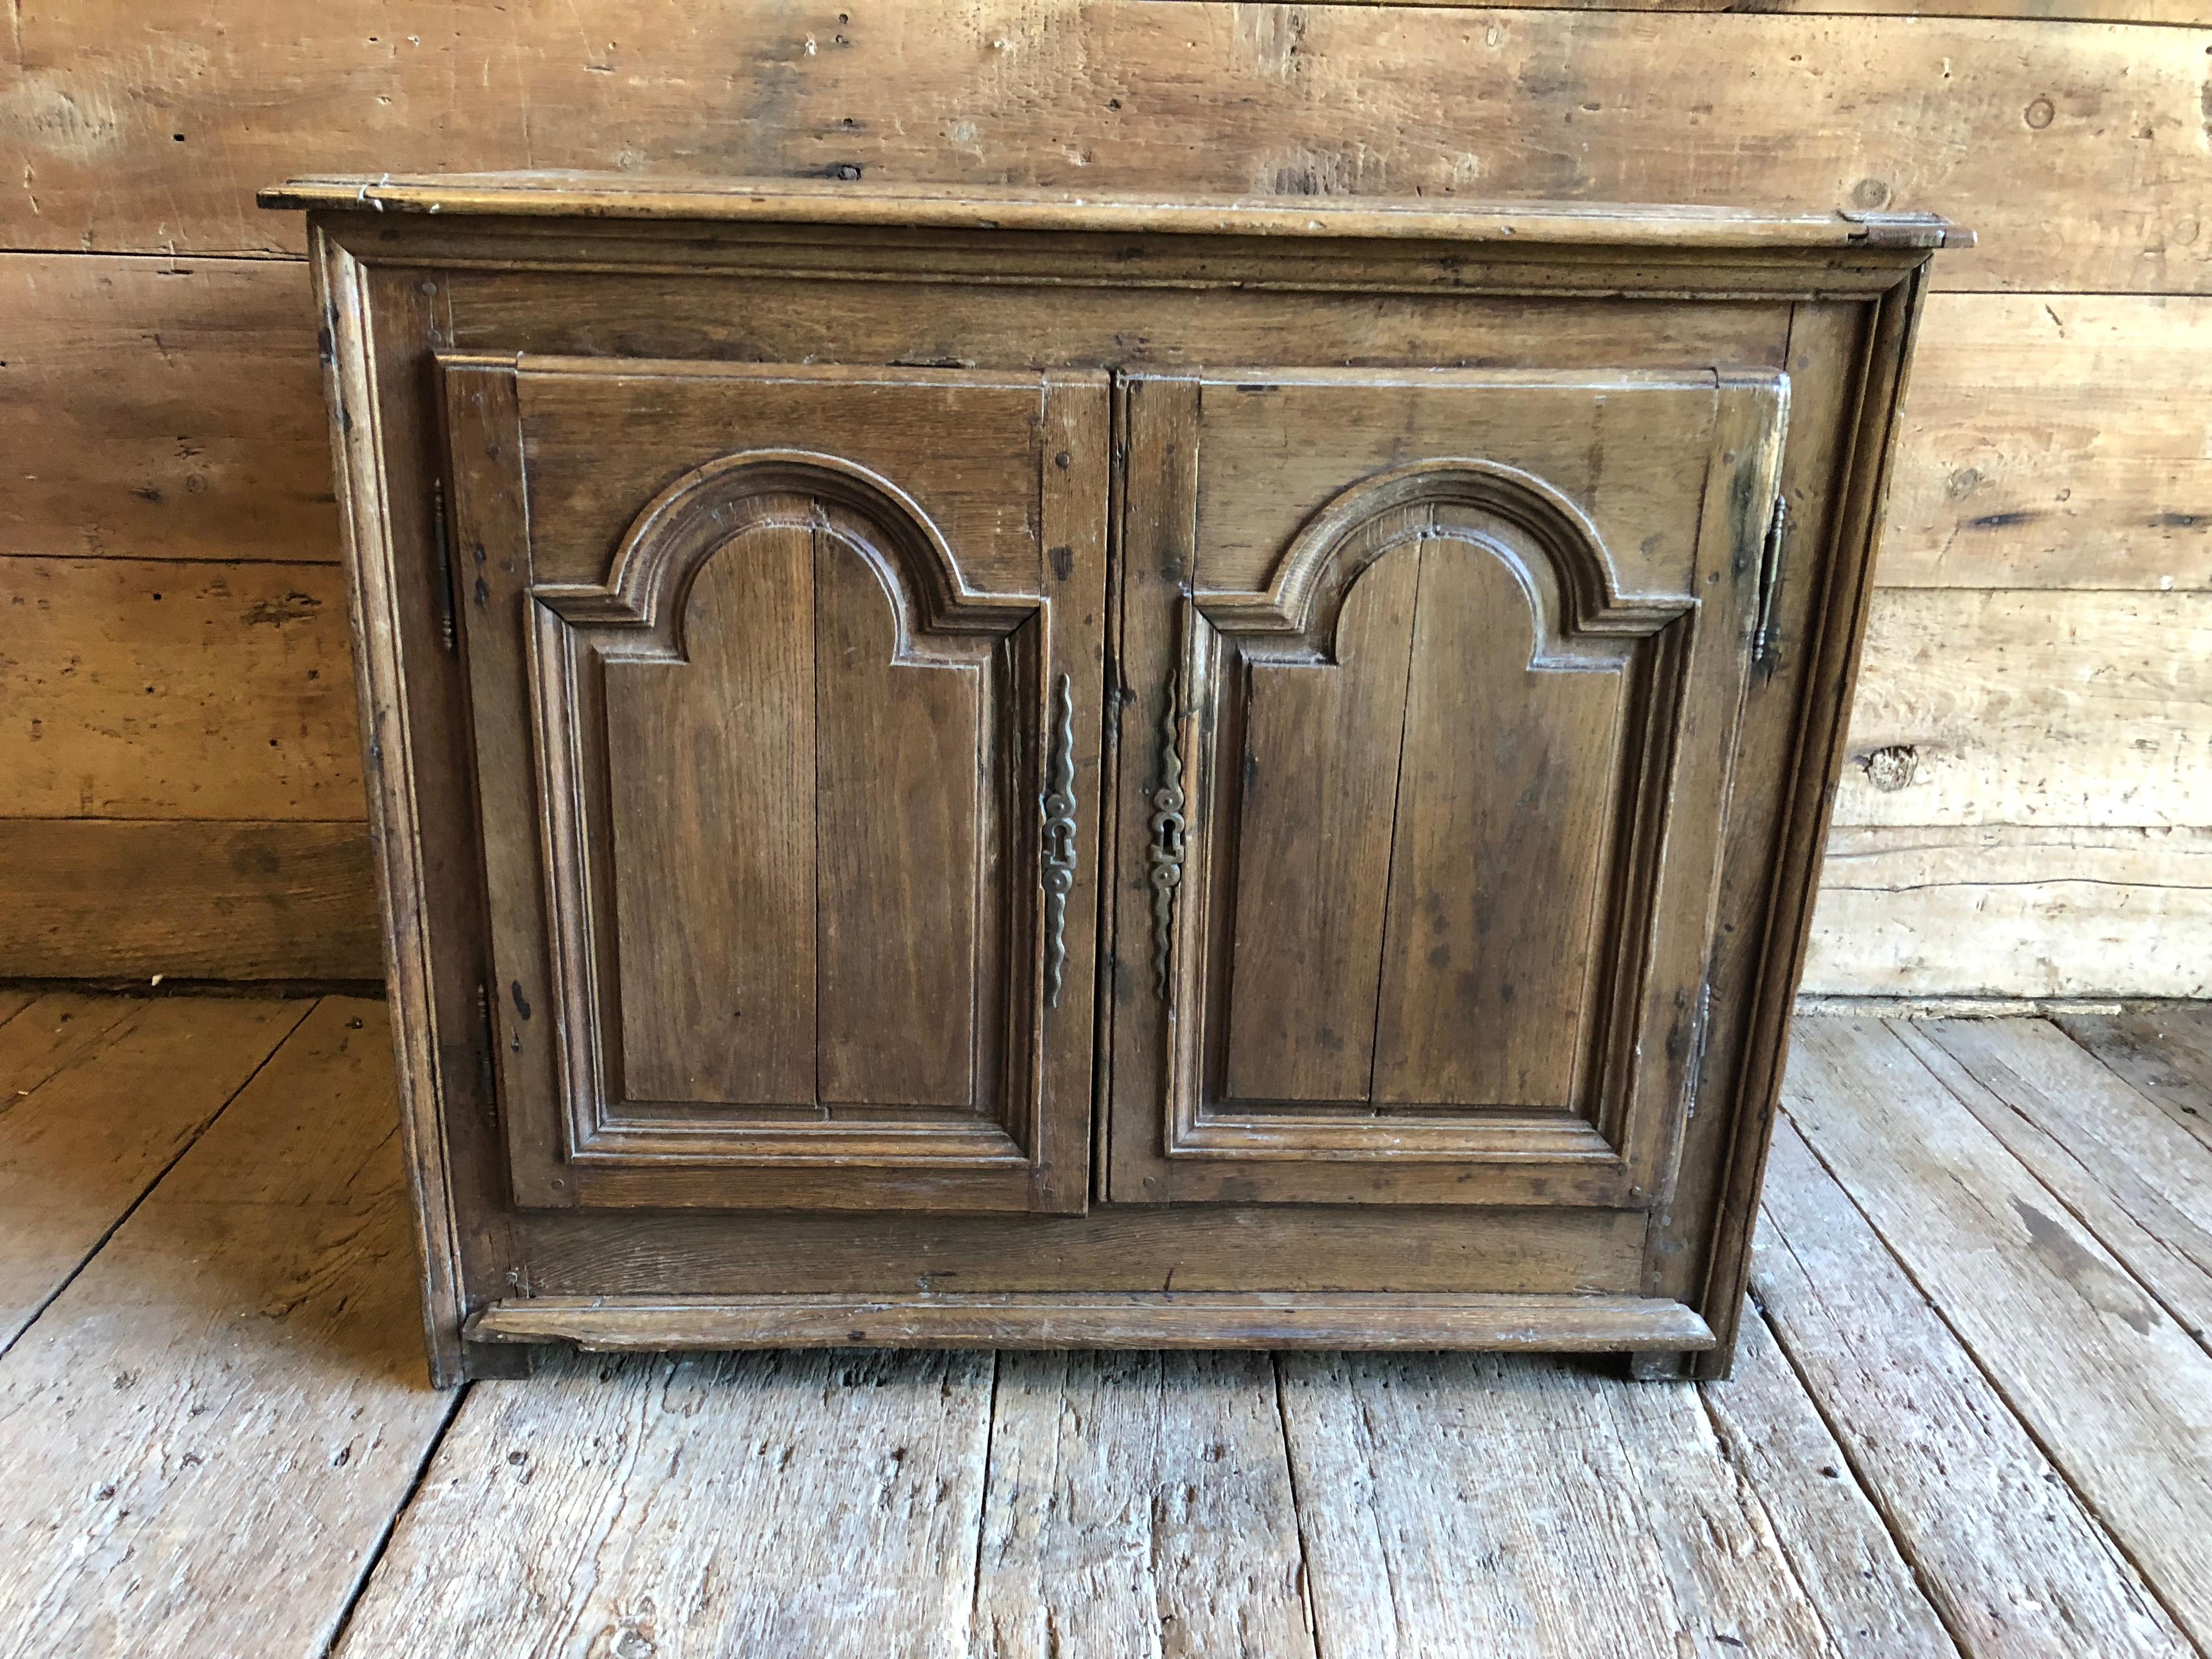 An early to mid-18th century French cabinet in oak, Louis XIV period, with two tombstone panelled doors, original wood top on simple feet. It is a nice size for a bar cabinet or a bathroom vanity.